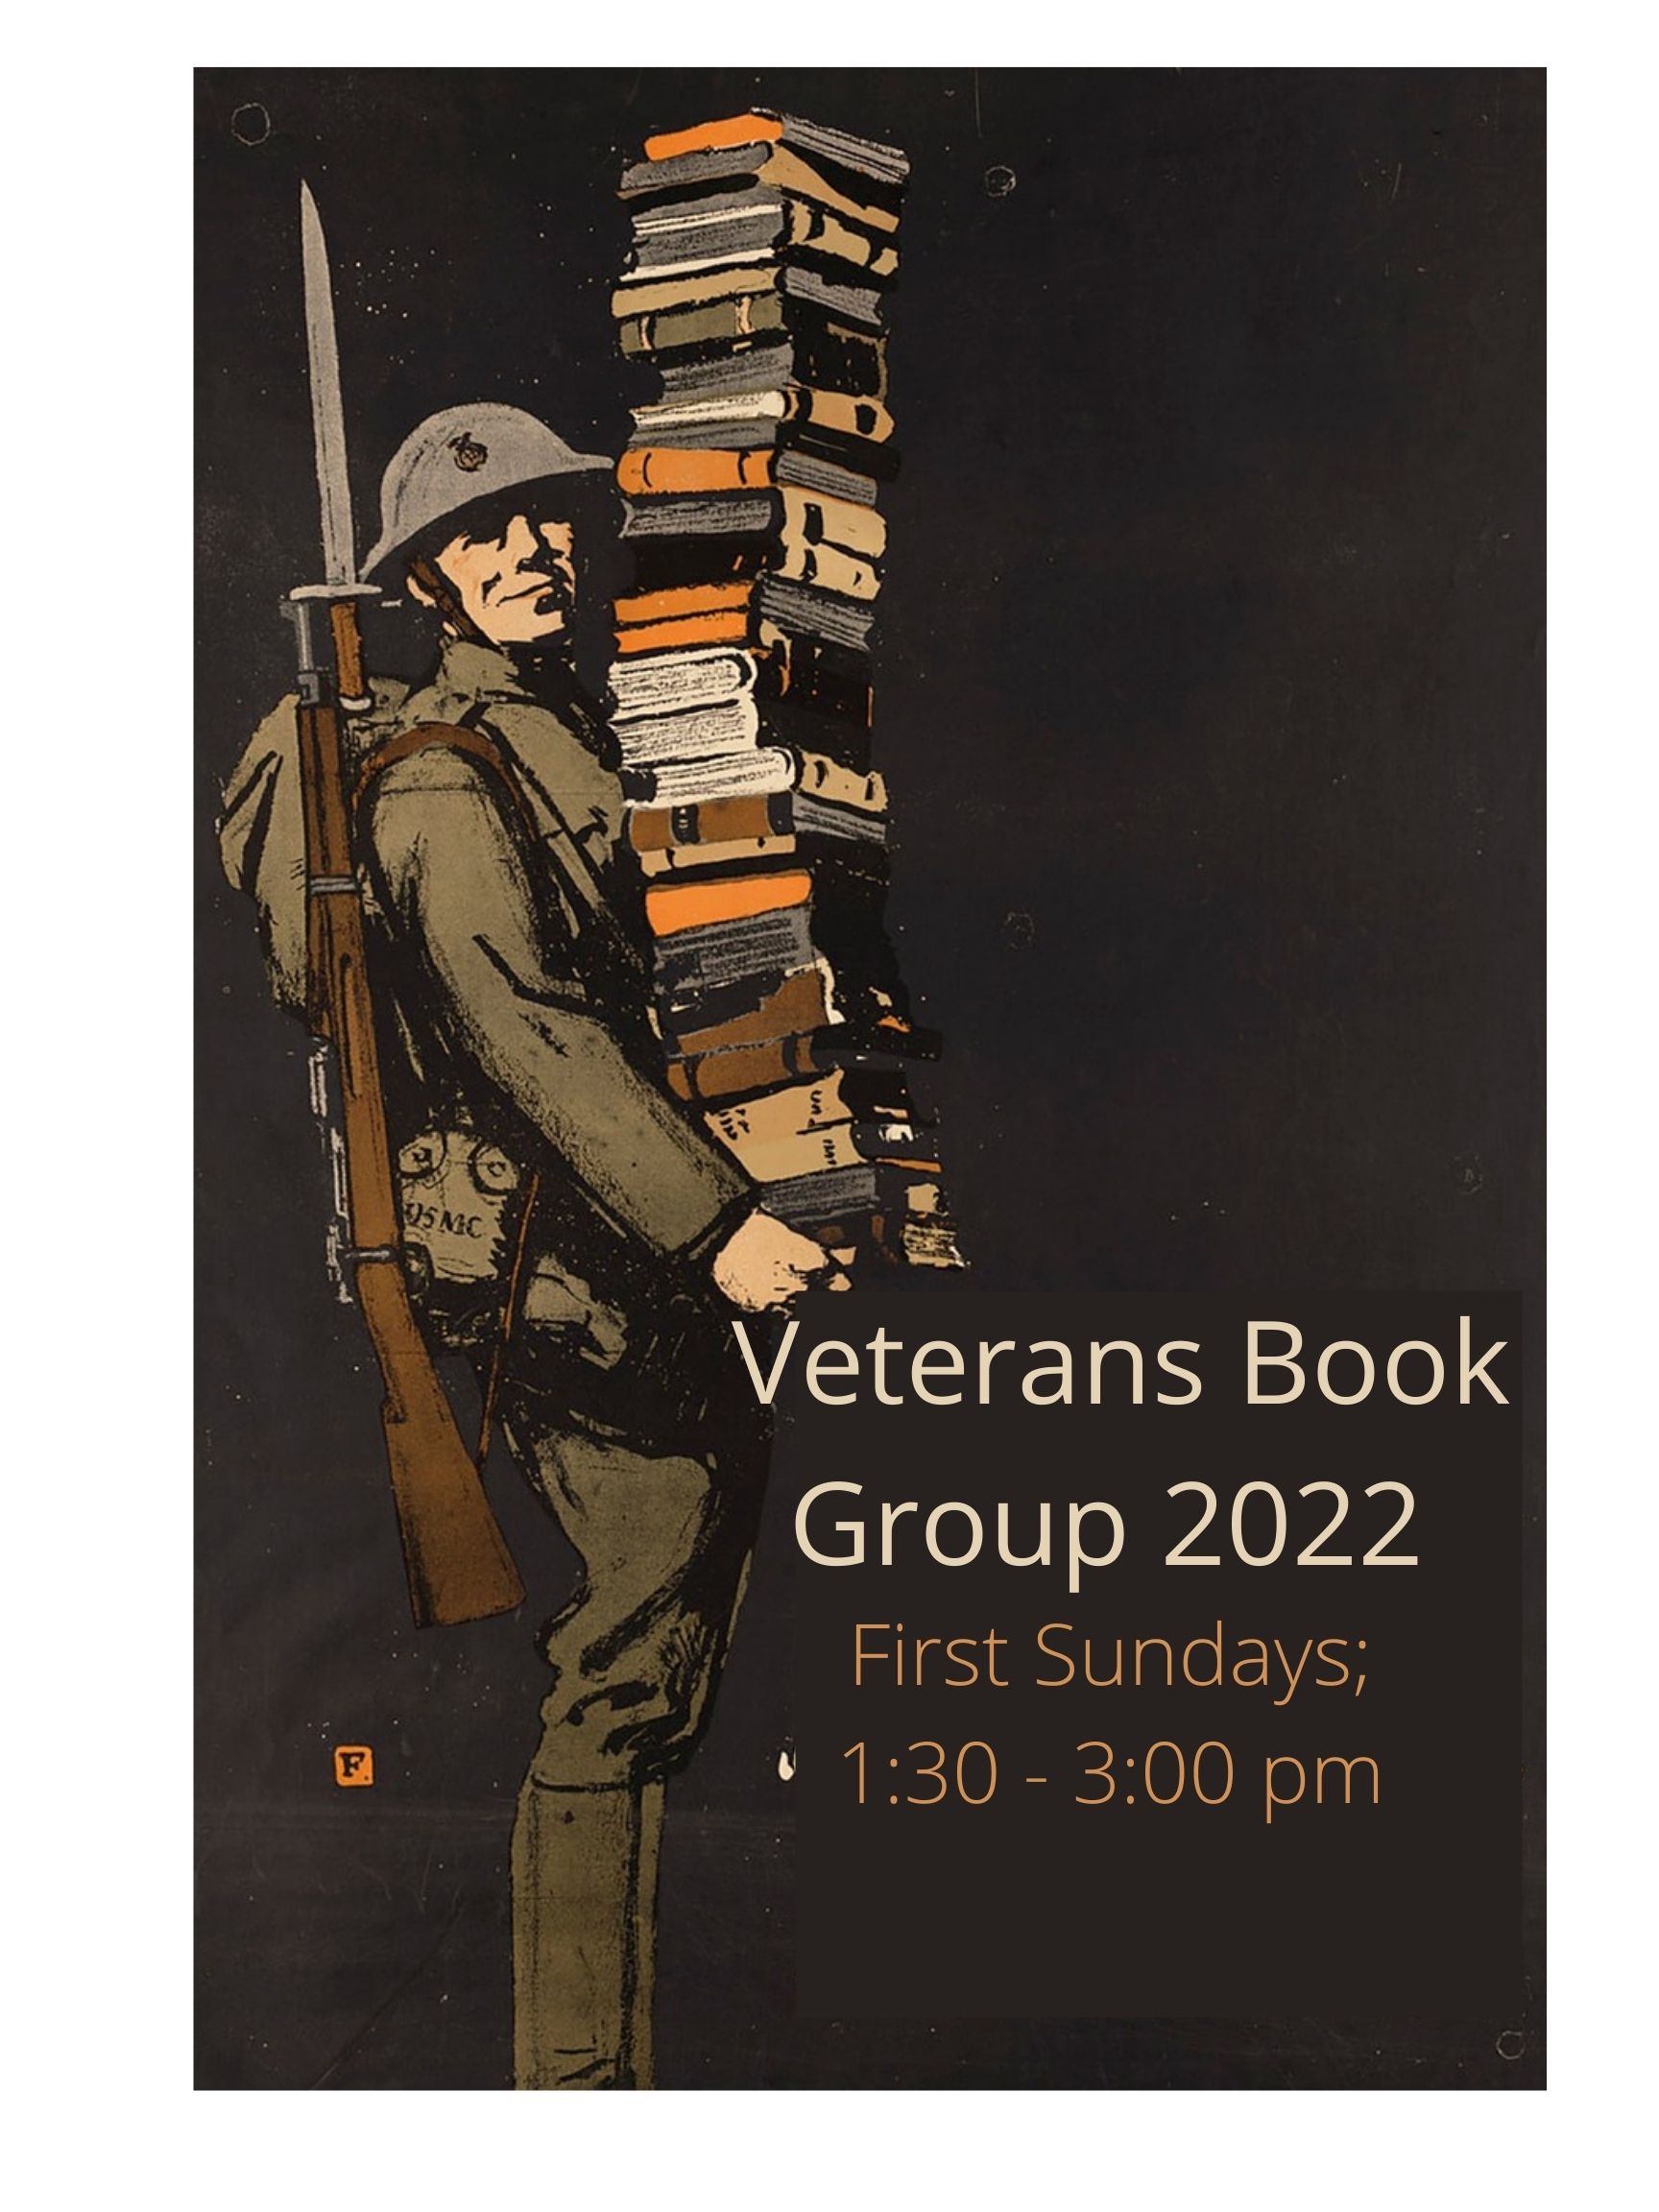 a soldier carrying a rifle and a tall stack of books